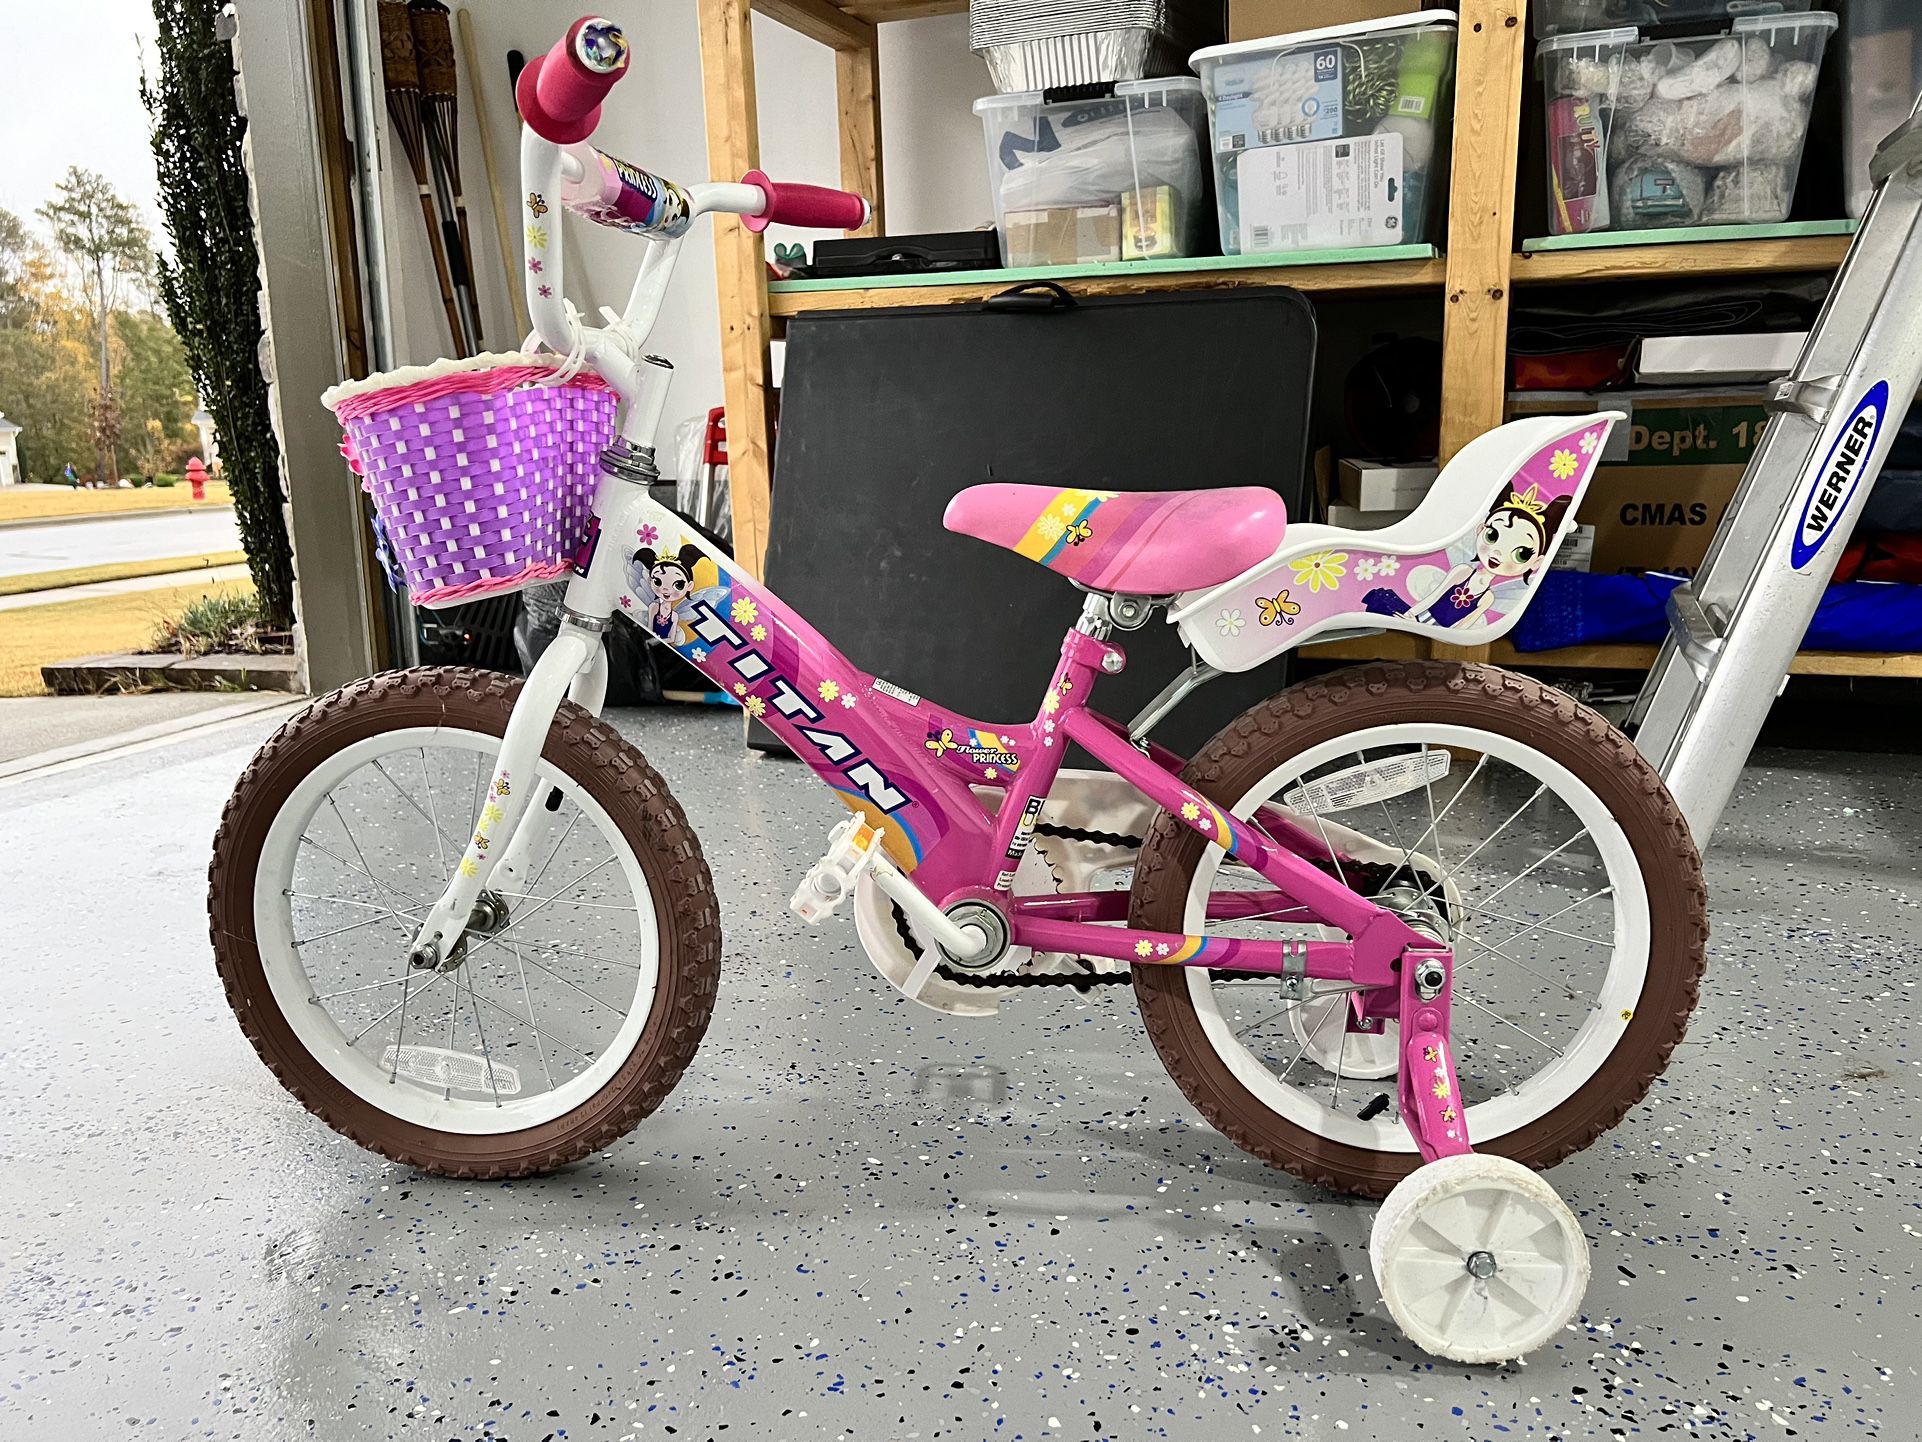 Kids bicycle For Sale - $25